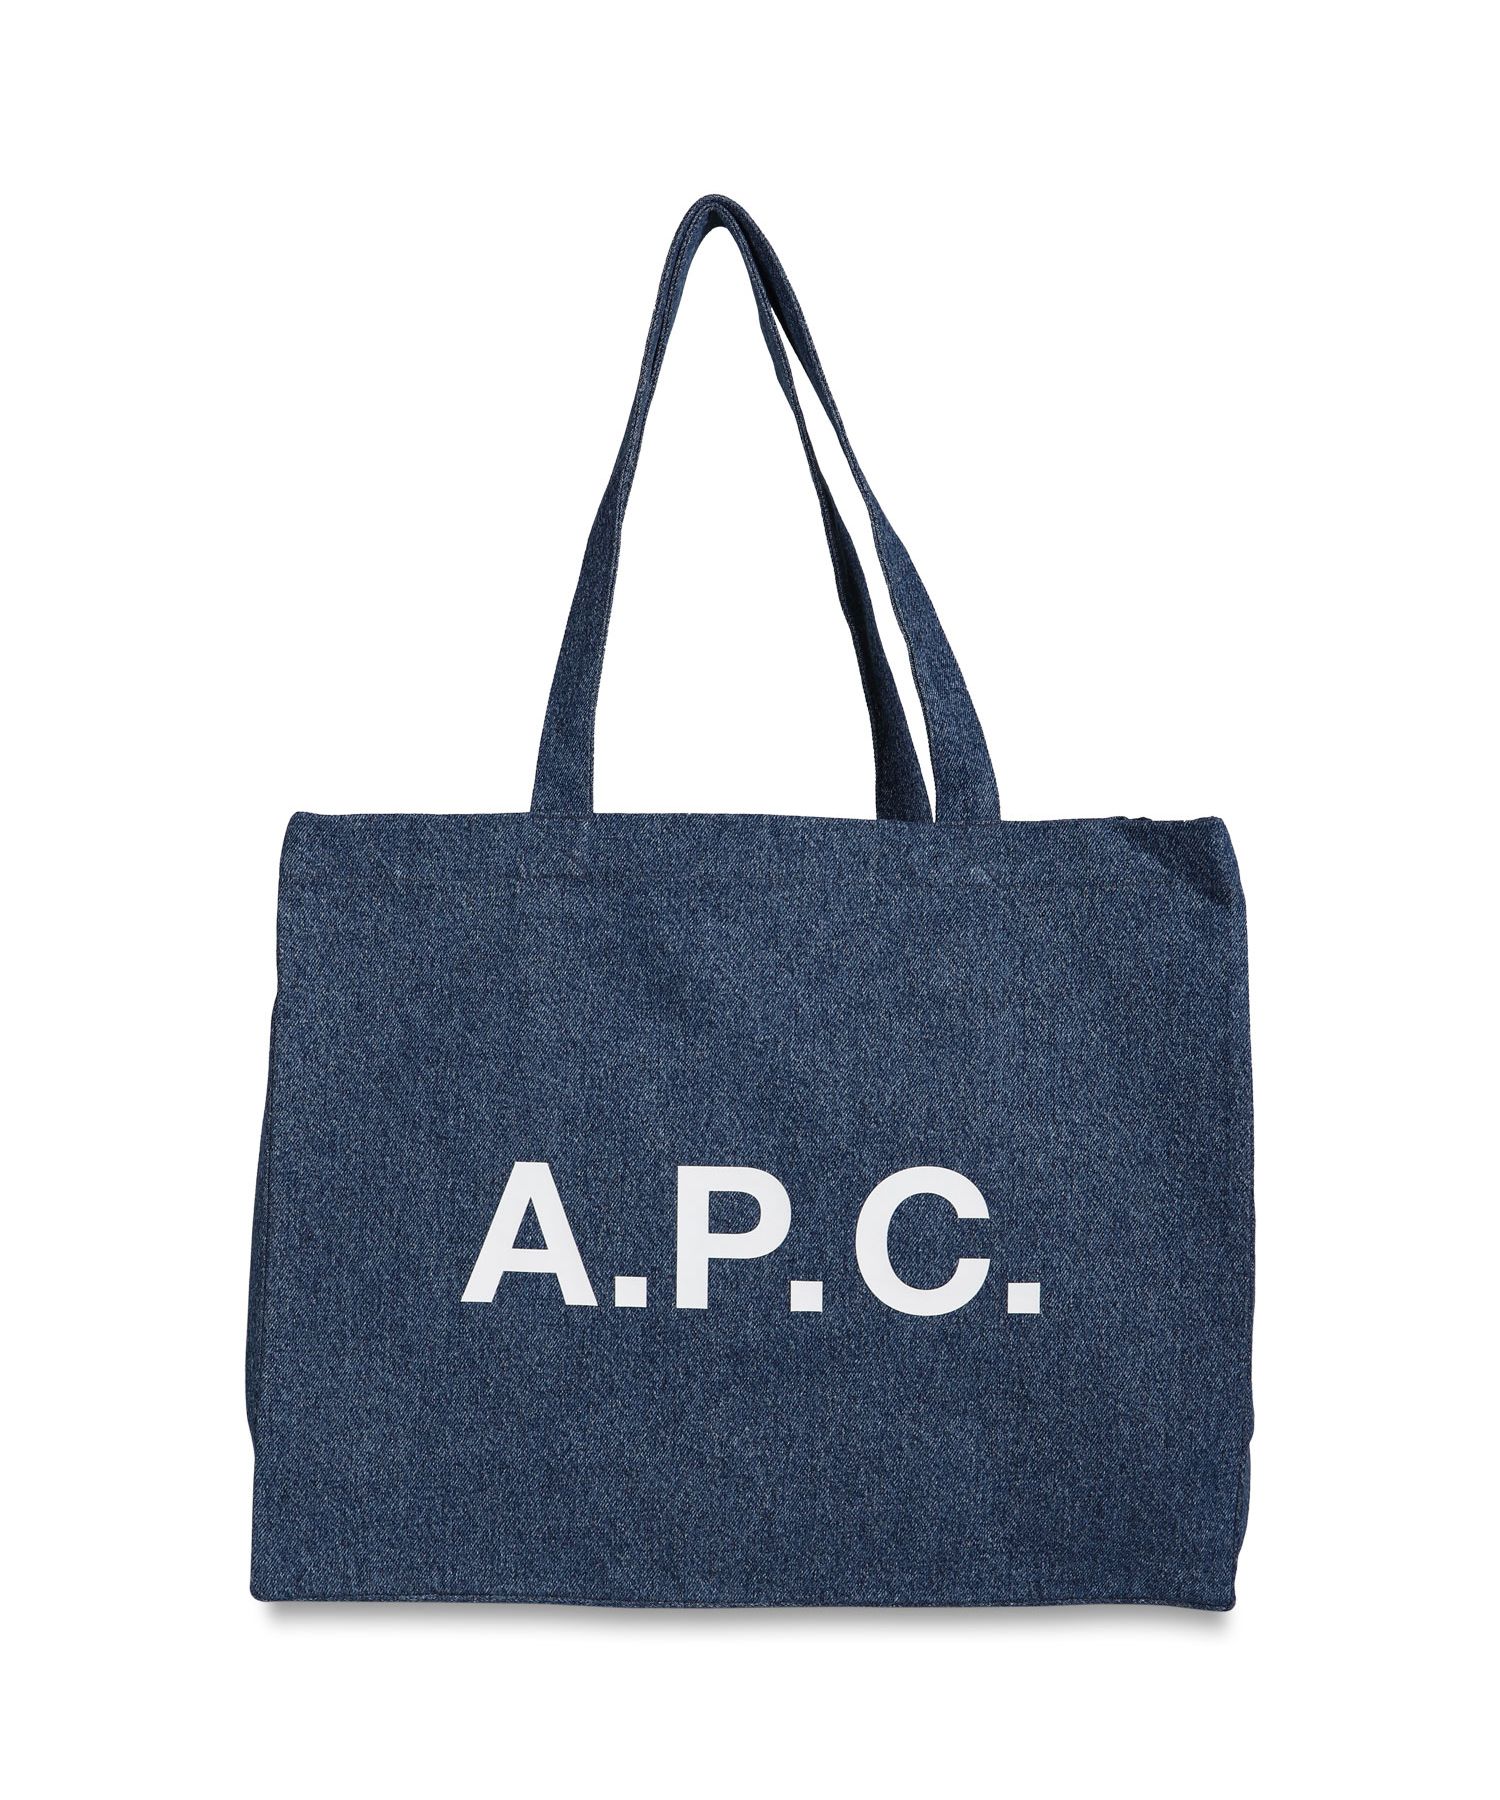 a.p.c アーペーセー　トートバッグ　完売品